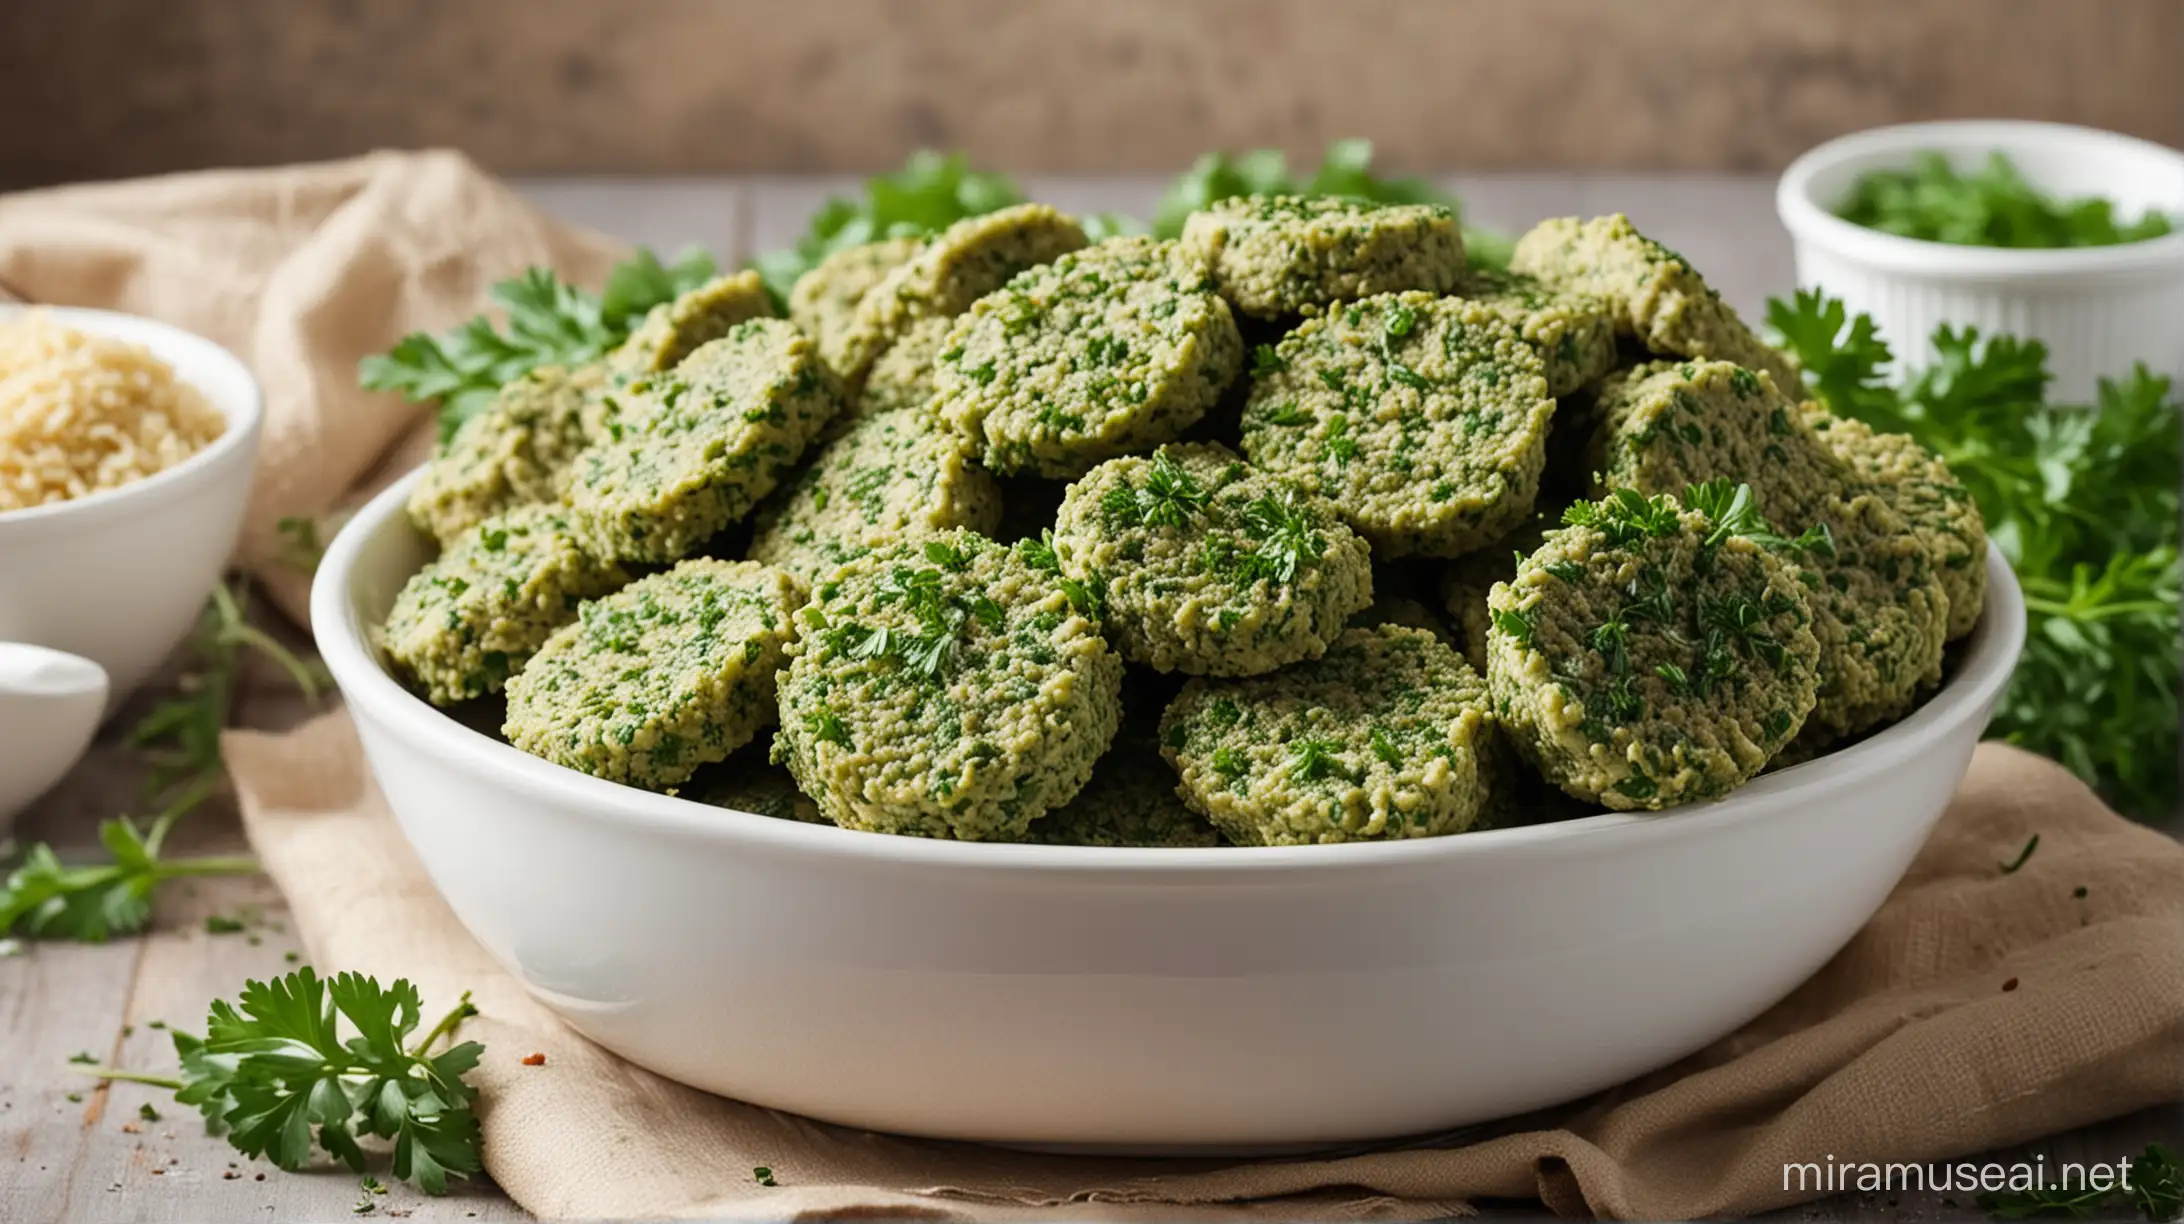 Fresh Green Cutlets with Parsley Herbs in a White Bowl